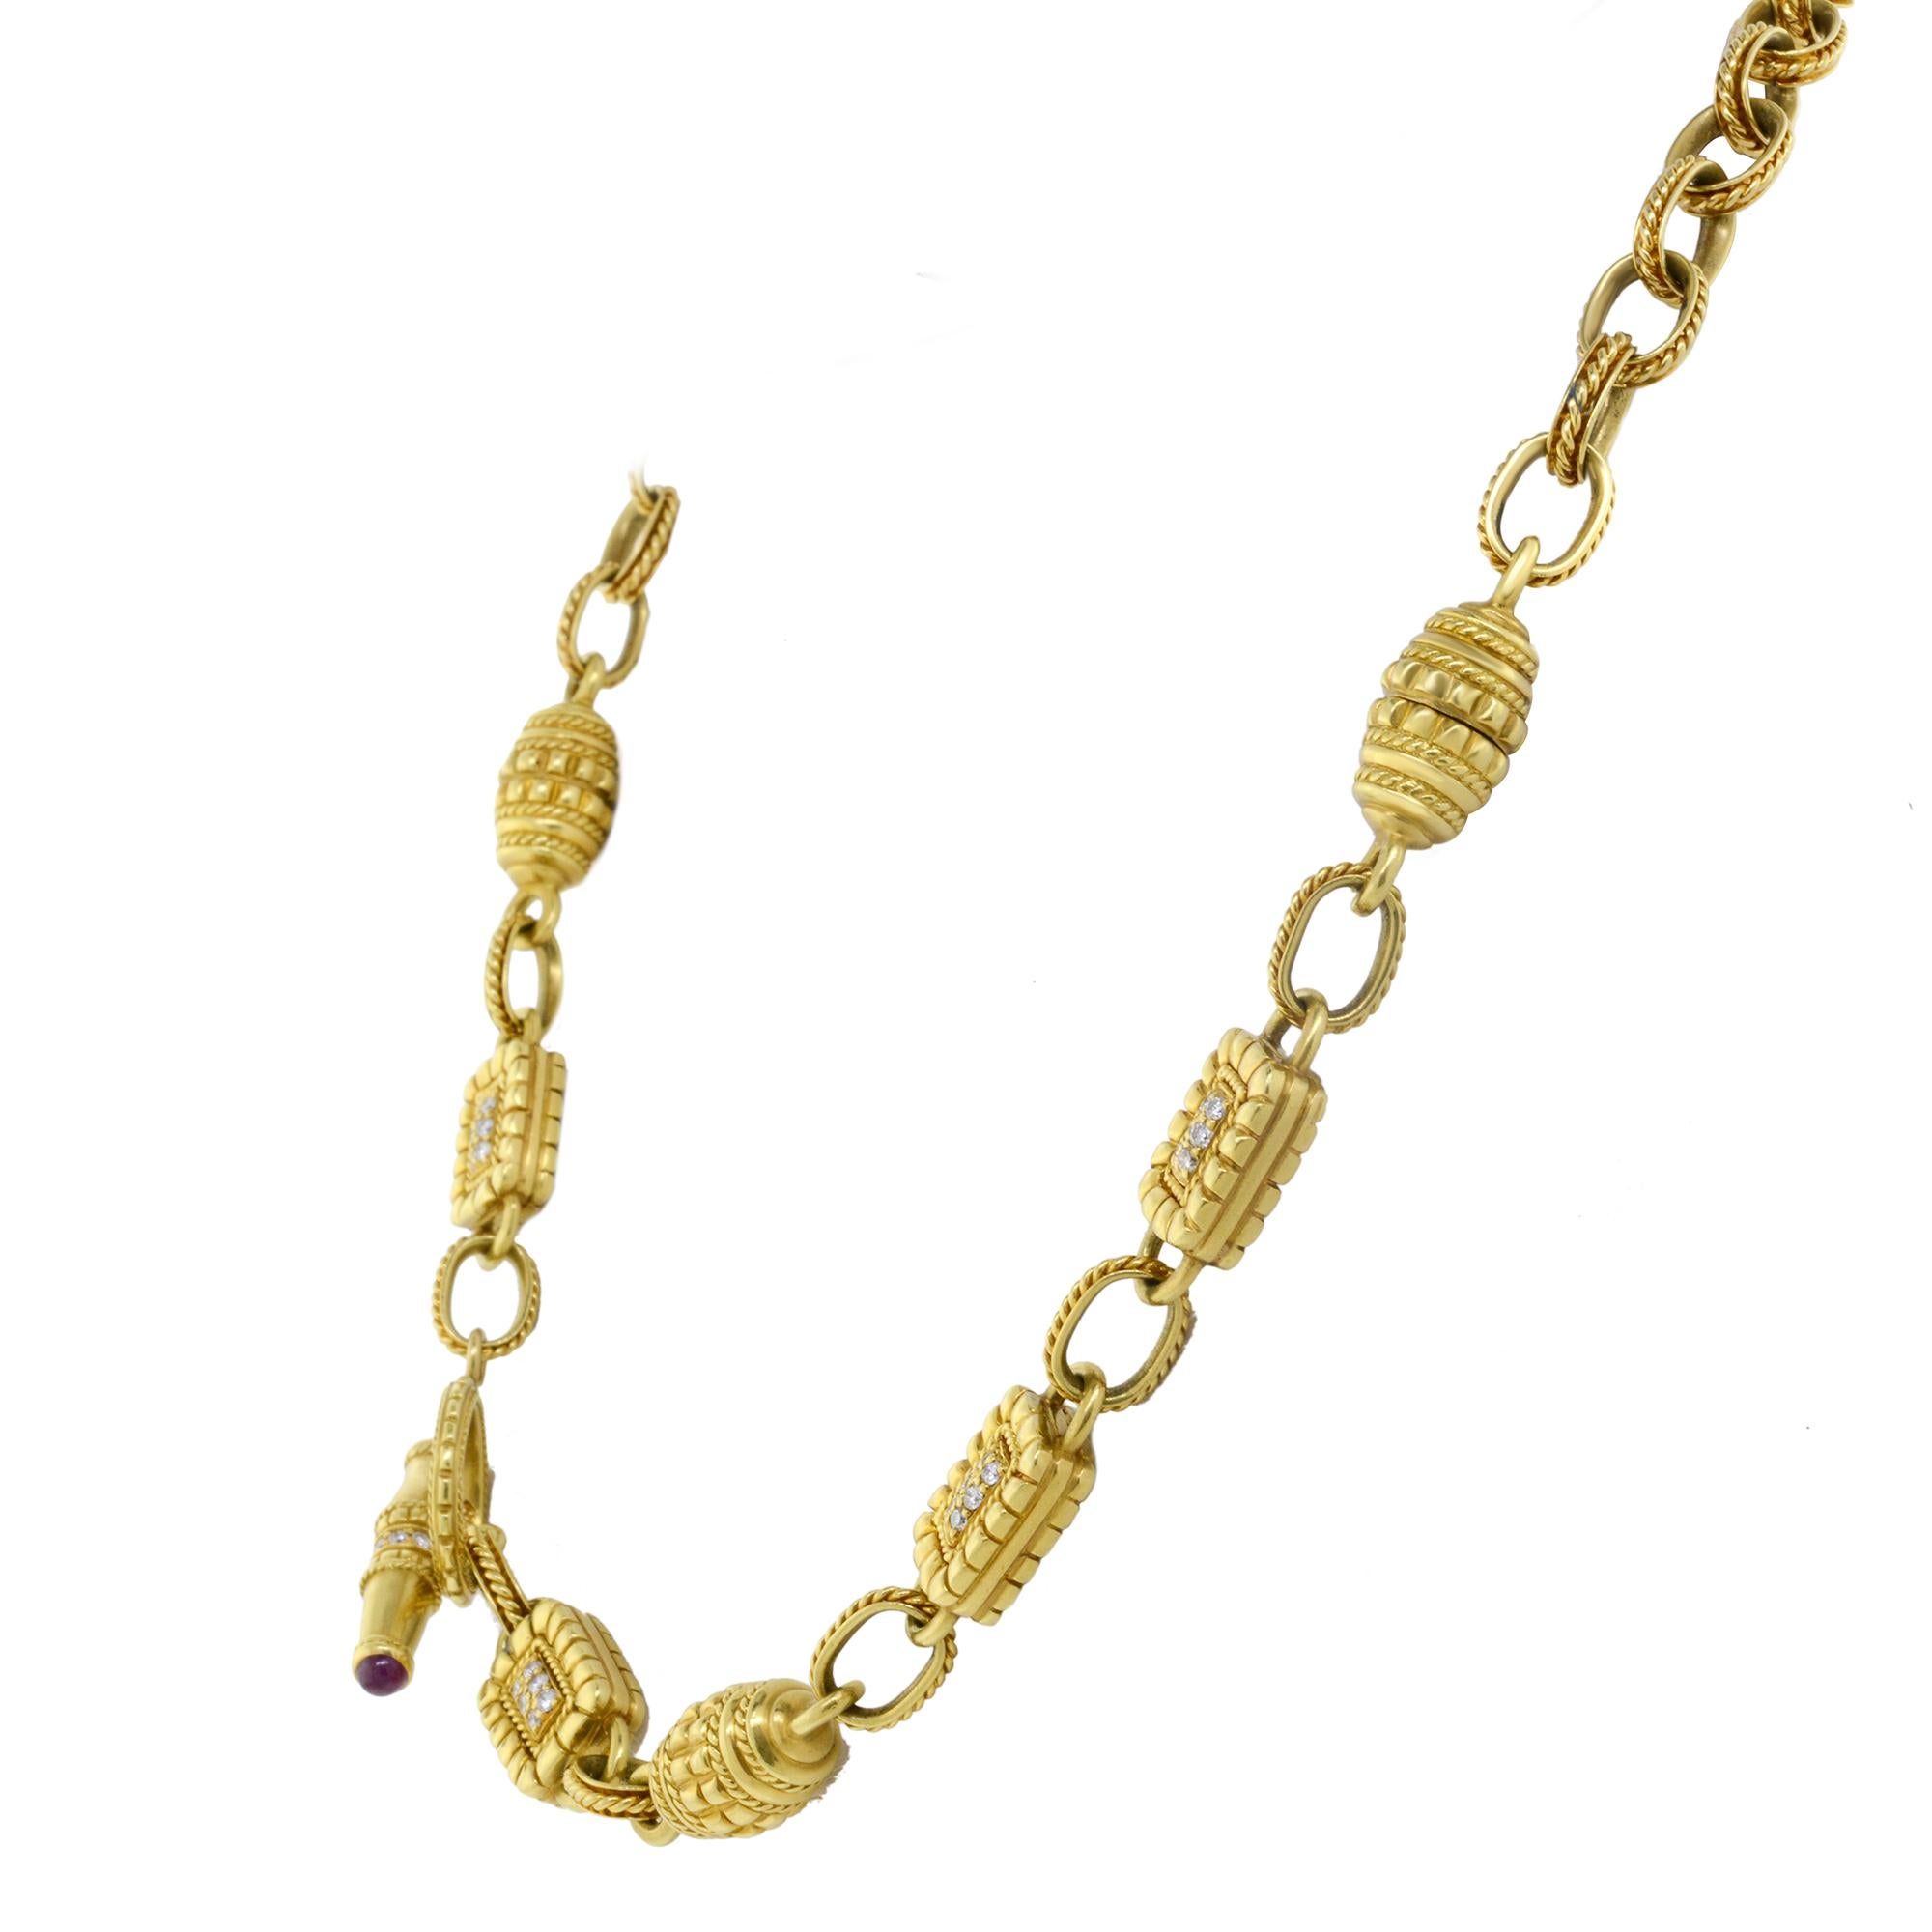 Retro jewels don't come much cooler than this remarkable necklace slash bracelet from the fabulous seventies. A rope like chain design with diamond accented stations and cabochon rubies at the end of the lock. This necklace turns into a lovely